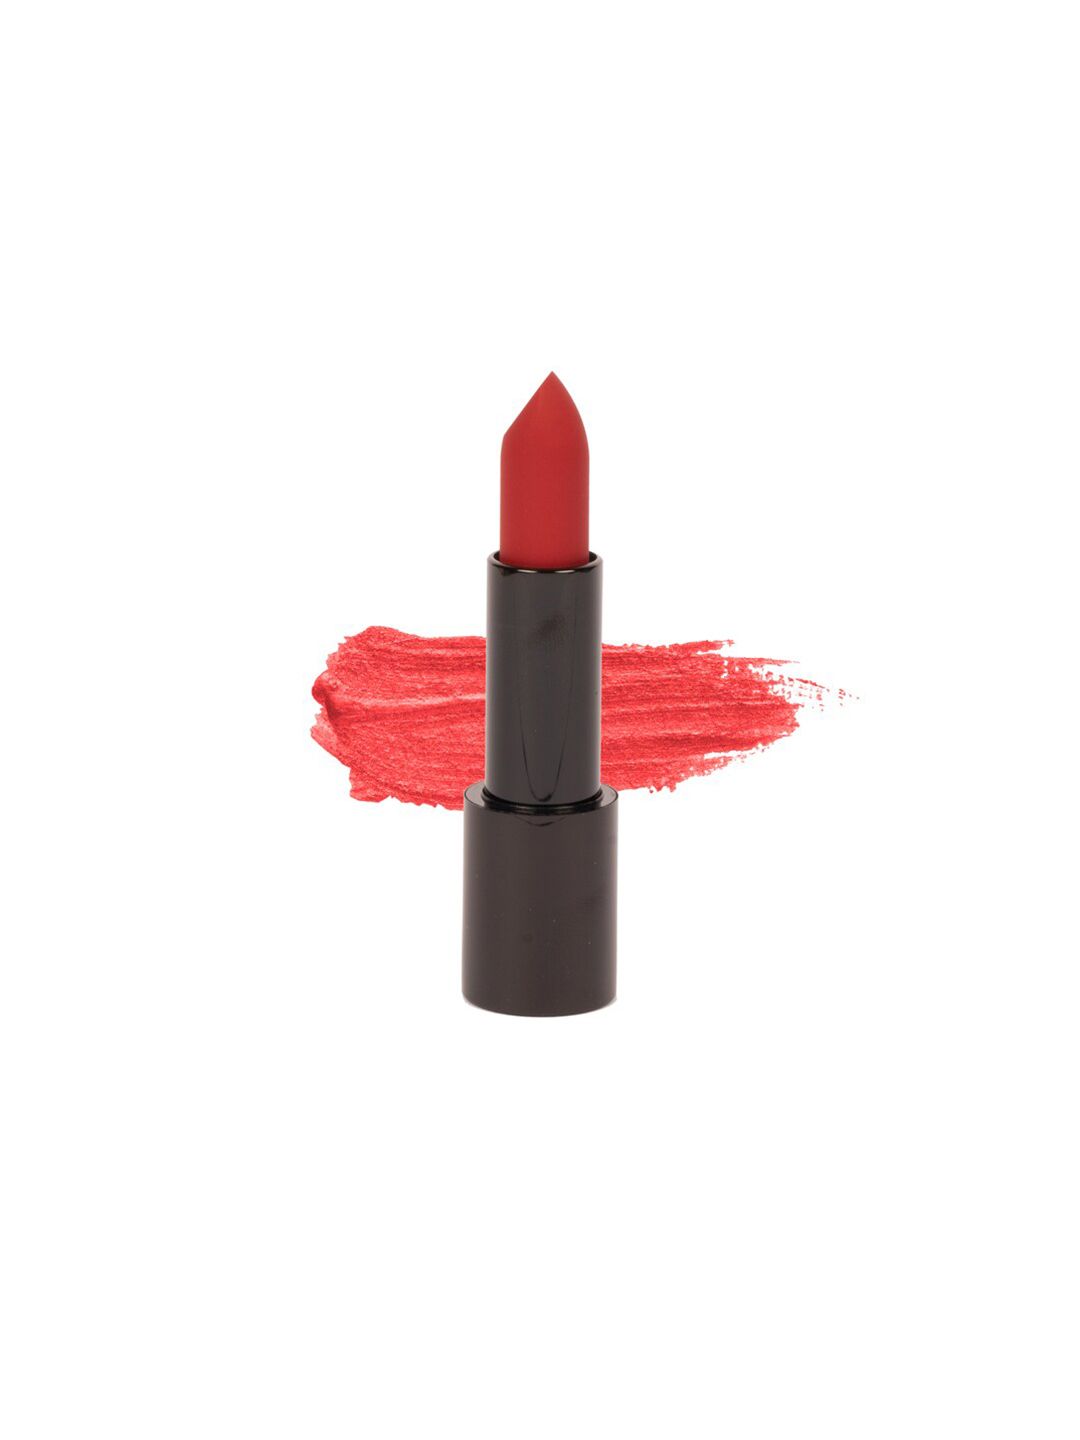 Paese Cosmetics Mattologie Matte Lipstick with Rice Oil 4.3 g - Vintage Red 112 Price in India